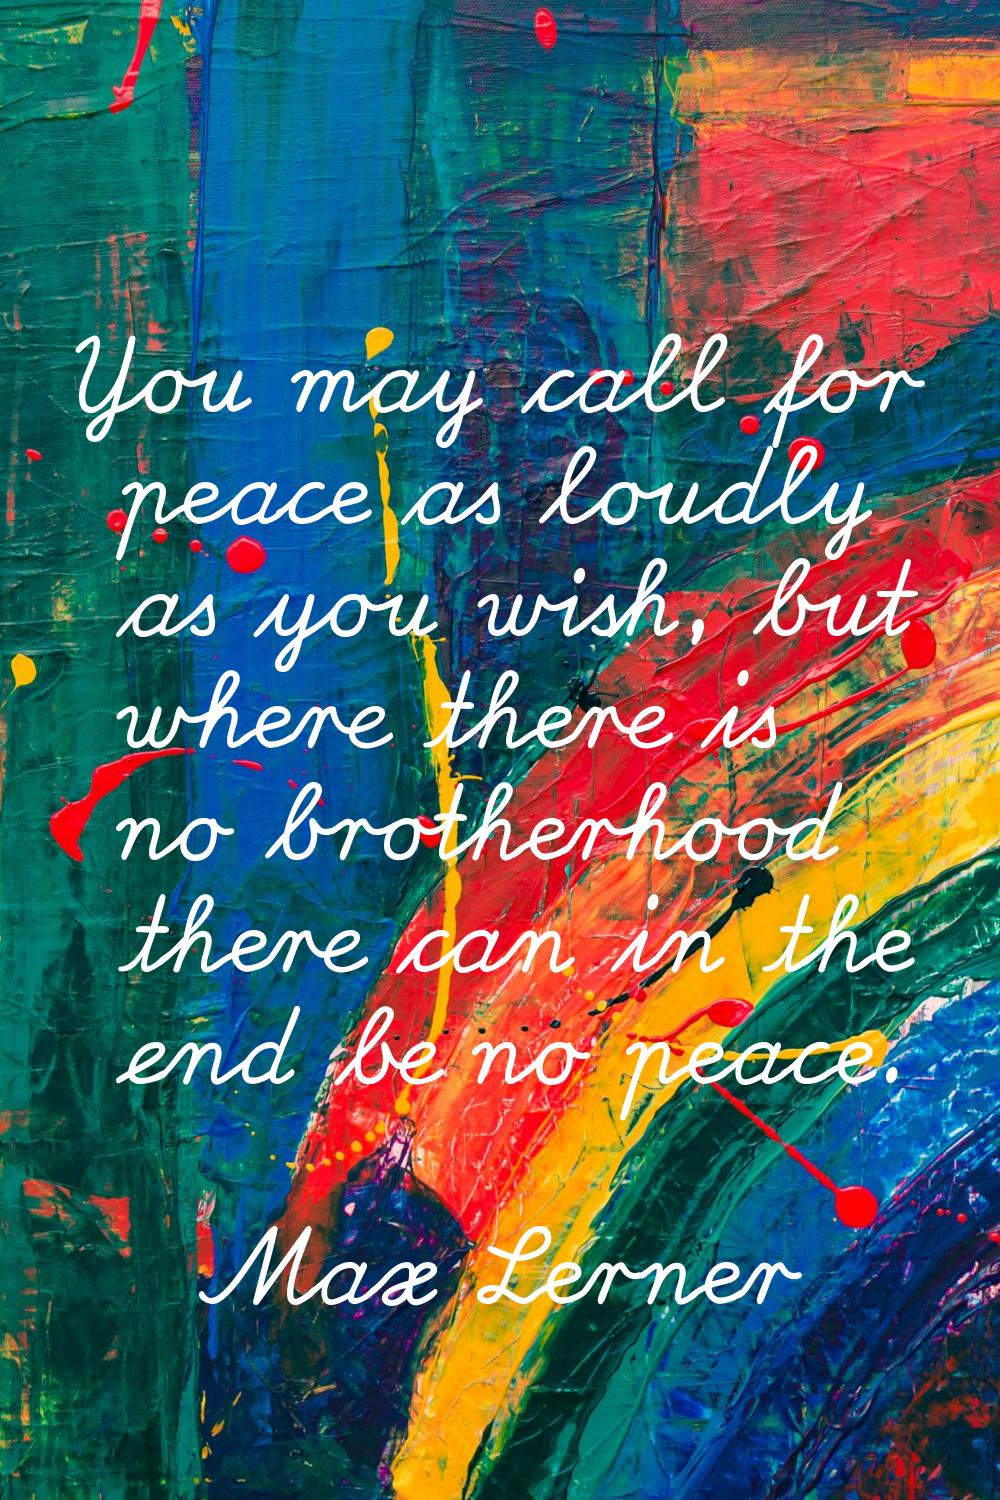 You may call for peace as loudly as you wish, but where there is no brotherhood there can in the en